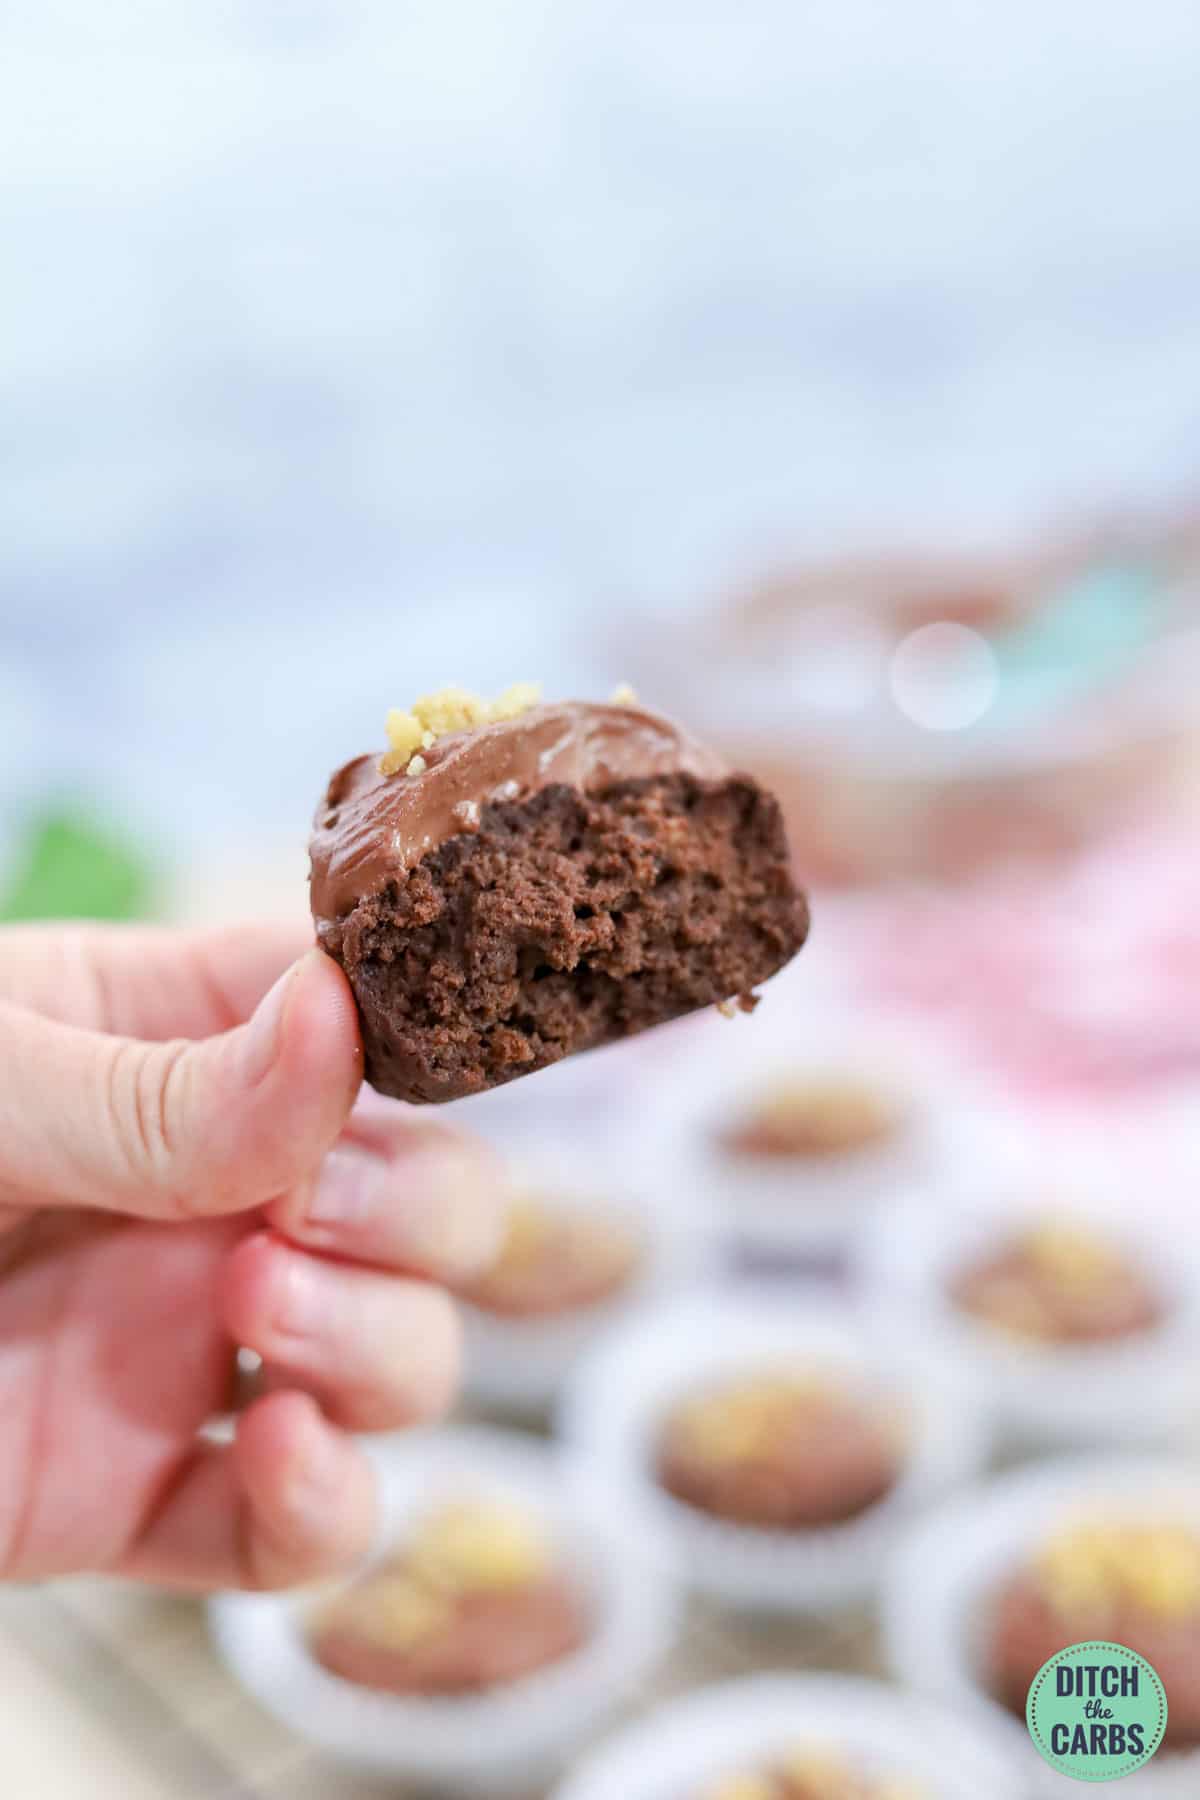 a hand holding up a chocolate cupcake with a bite taken